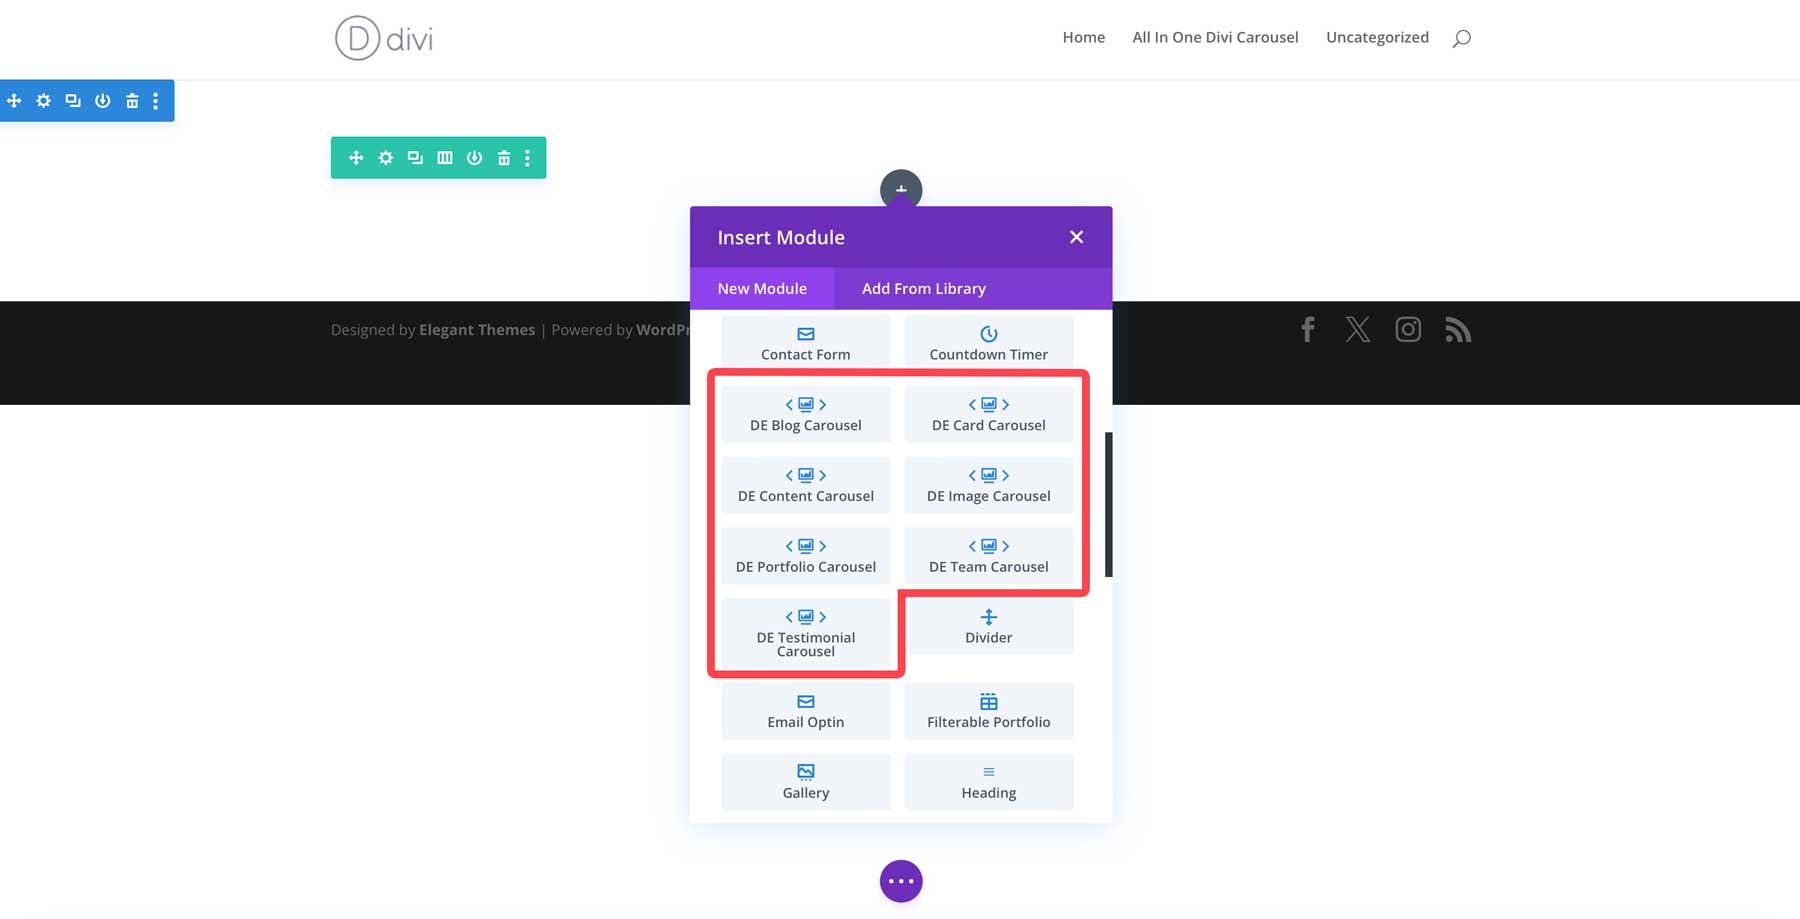 All In One Carousel for Divi modules